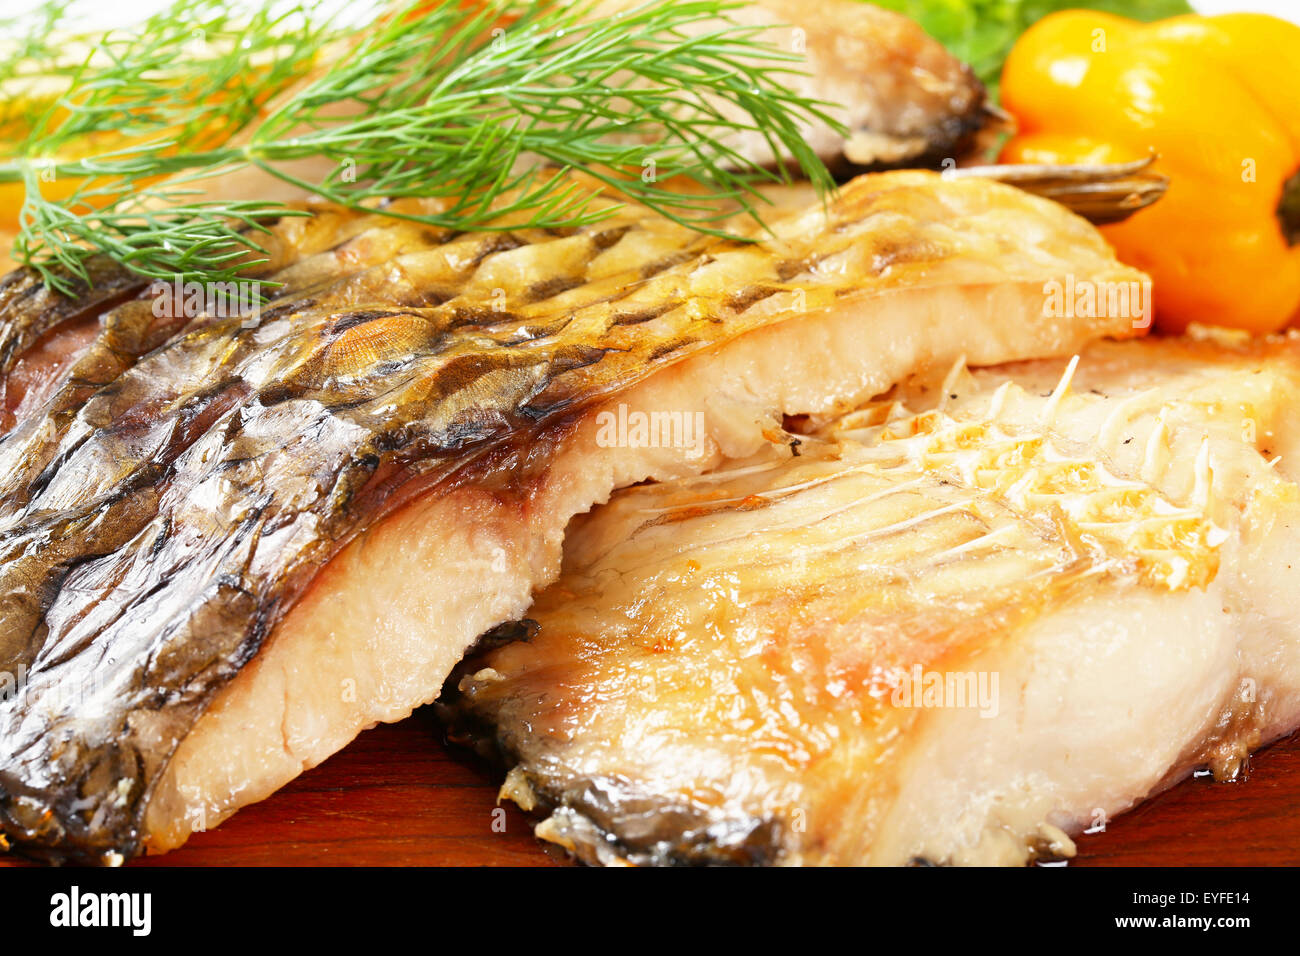 Oven baked carp fillets with dill Stock Photo